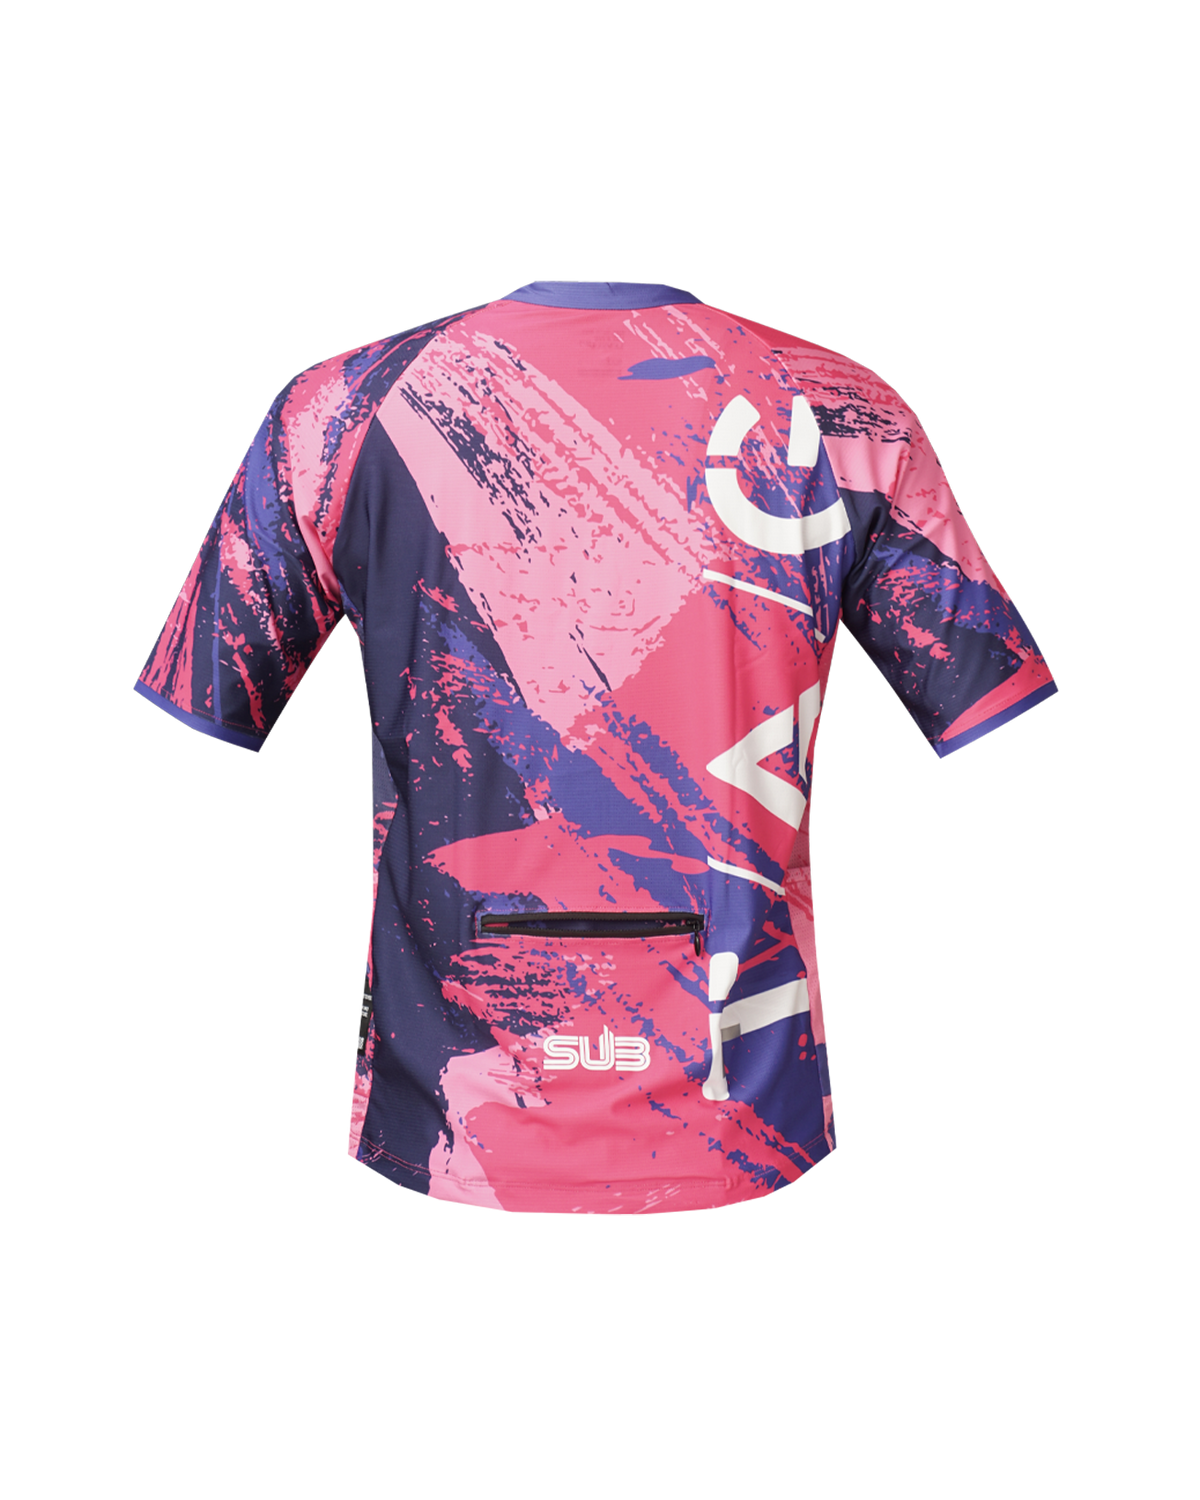 Gravel T/A/G Camo Short Sleeves Pink